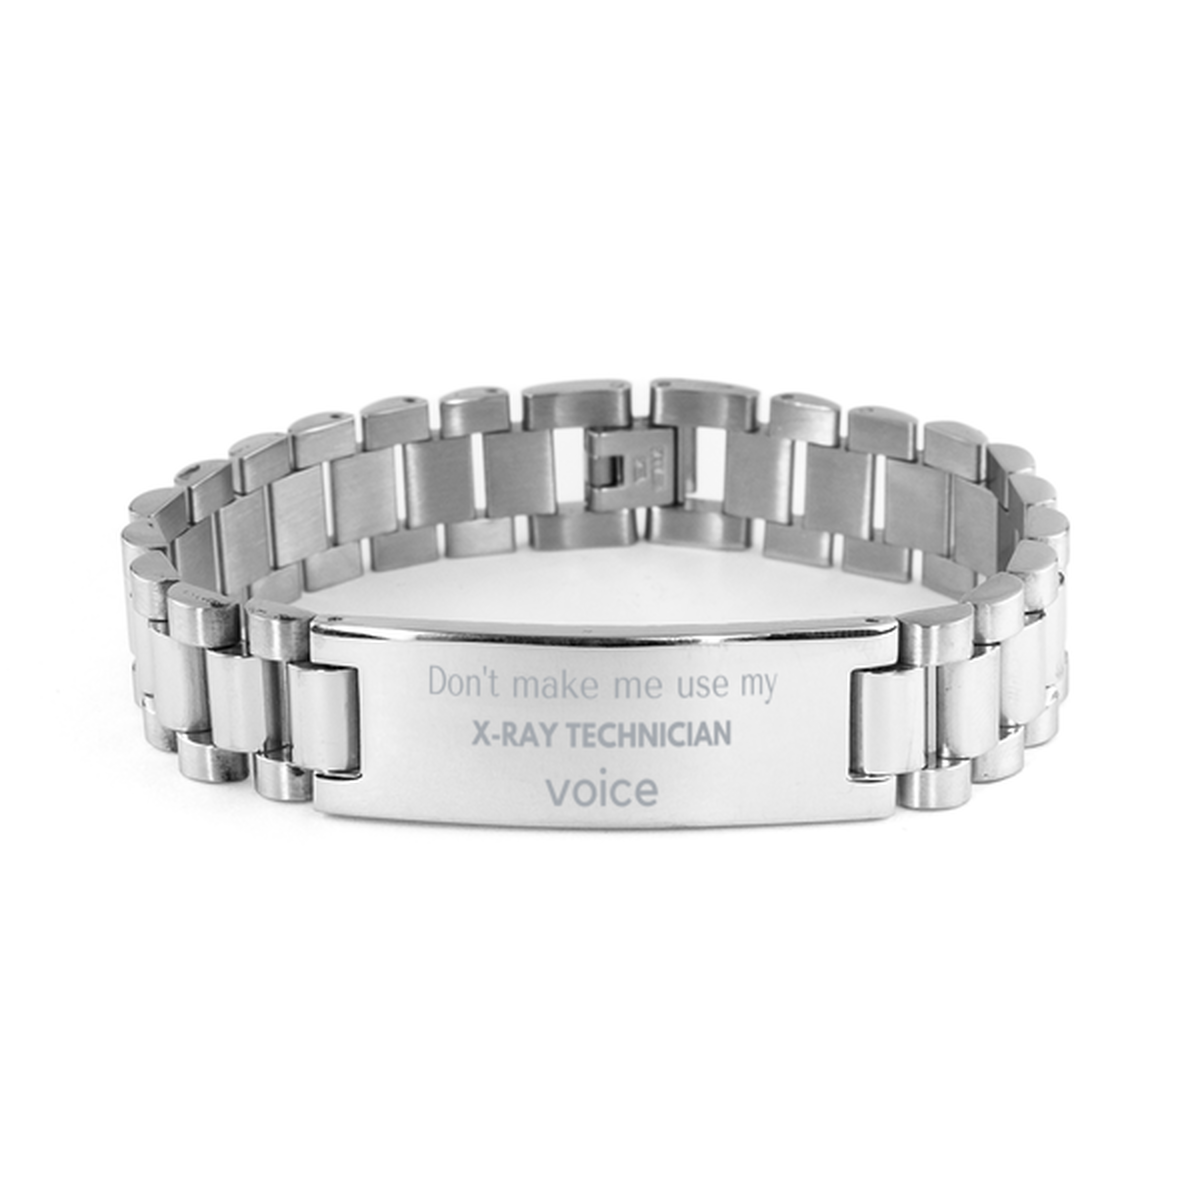 Don't make me use my X-Ray Technician voice, Sarcasm X-Ray Technician Gifts, Christmas X-Ray Technician Ladder Stainless Steel Bracelet Birthday Unique Gifts For X-Ray Technician Coworkers, Men, Women, Colleague, Friends